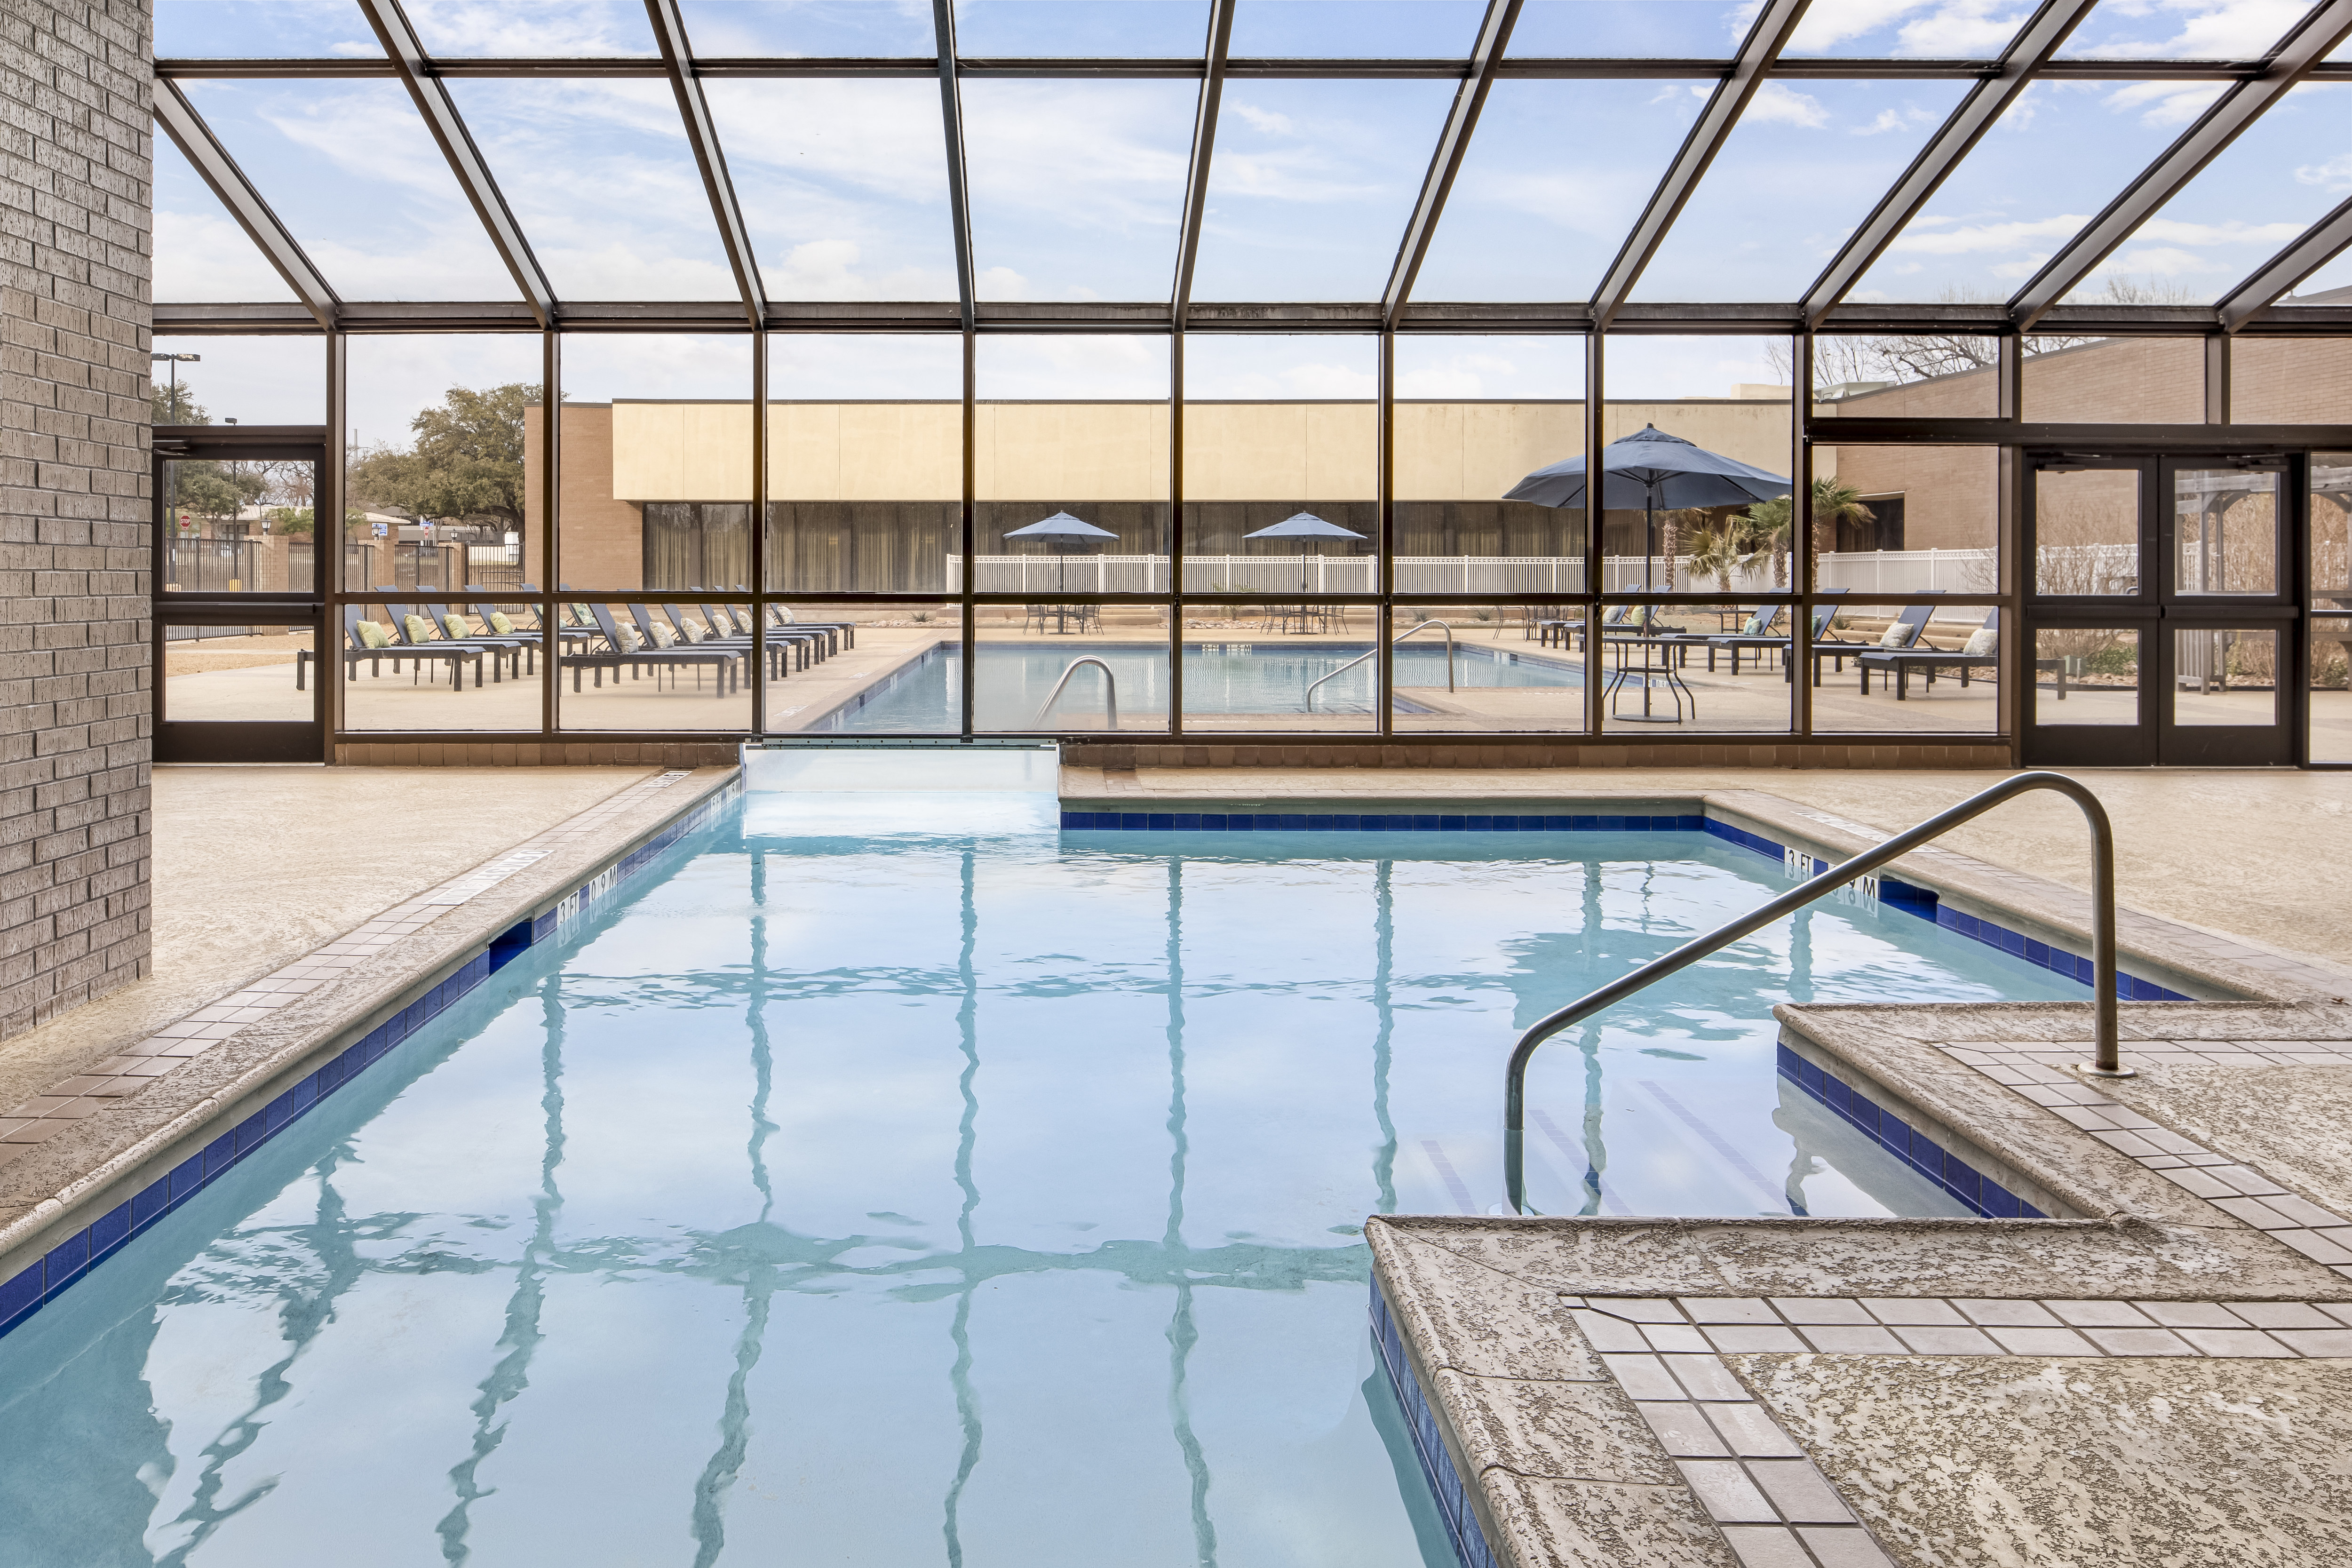 Outdoor and Indoor Pool Areas with Large Windows